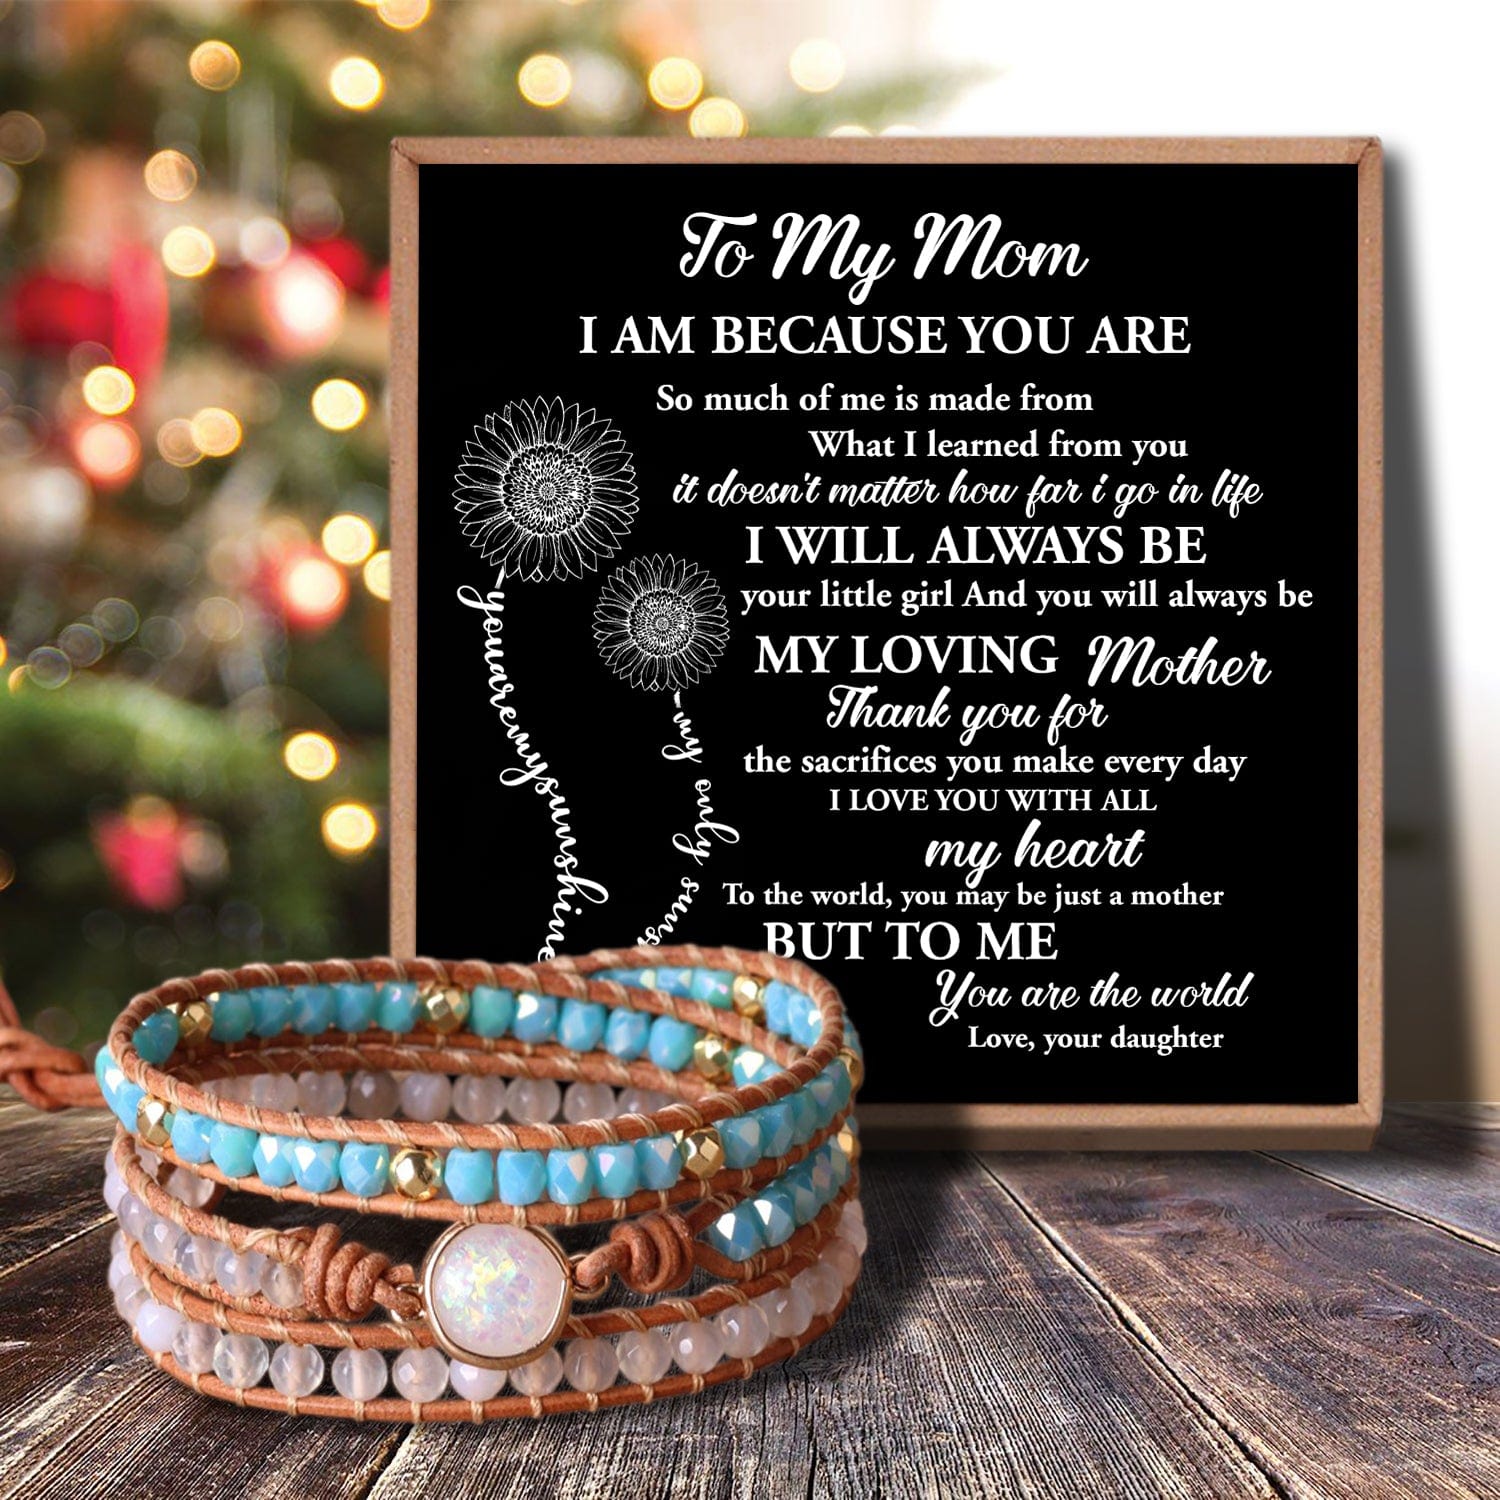 Bracelets For Mom Daughter To Mom - My Loving Mother Crystal Beaded Bracelet GiveMe-Gifts